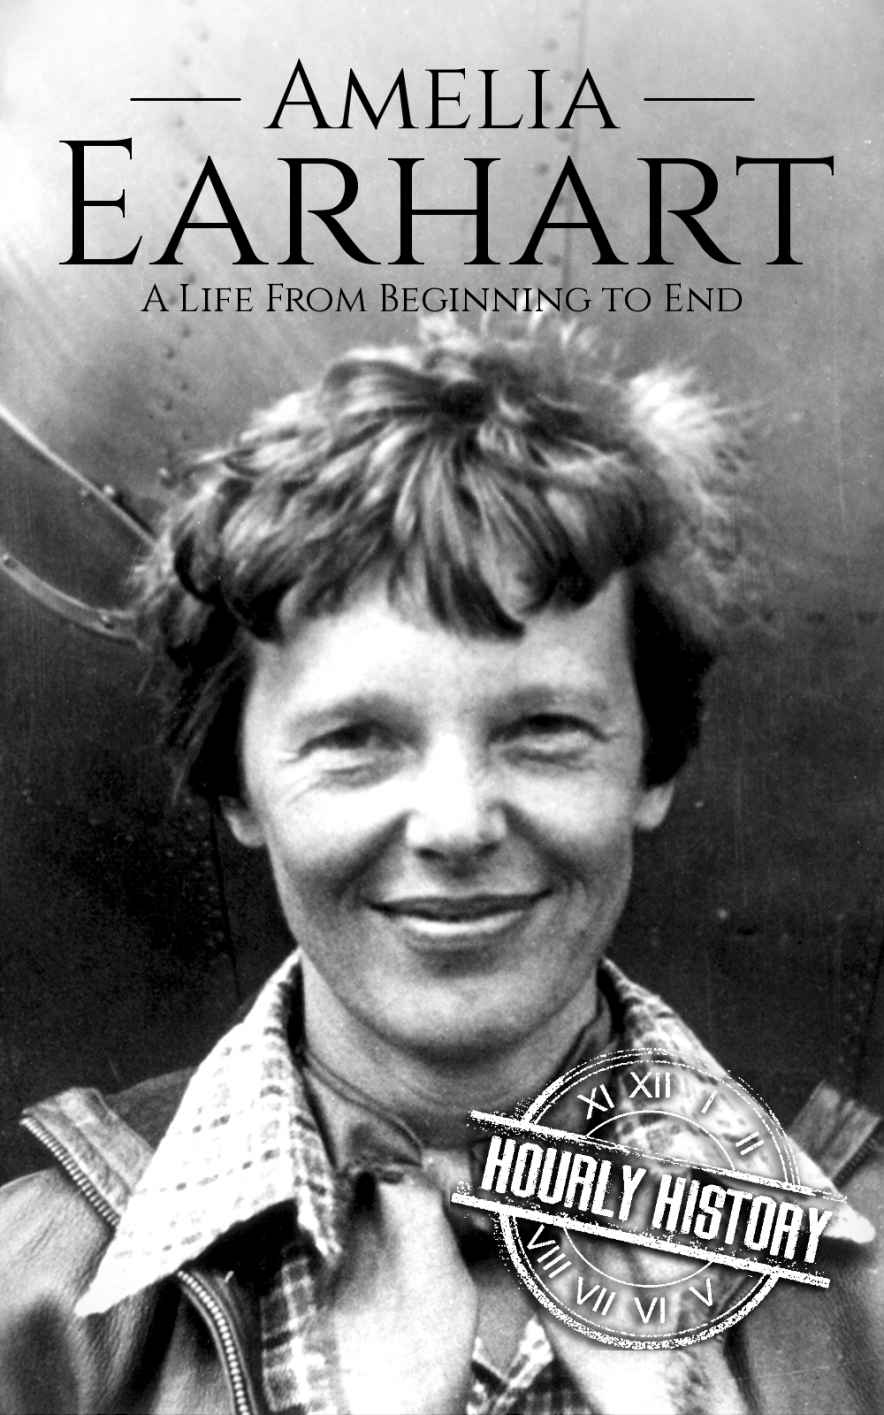 Amelia Earhart: A Life from Beginning to End (Biographies of Women in History Book 11)